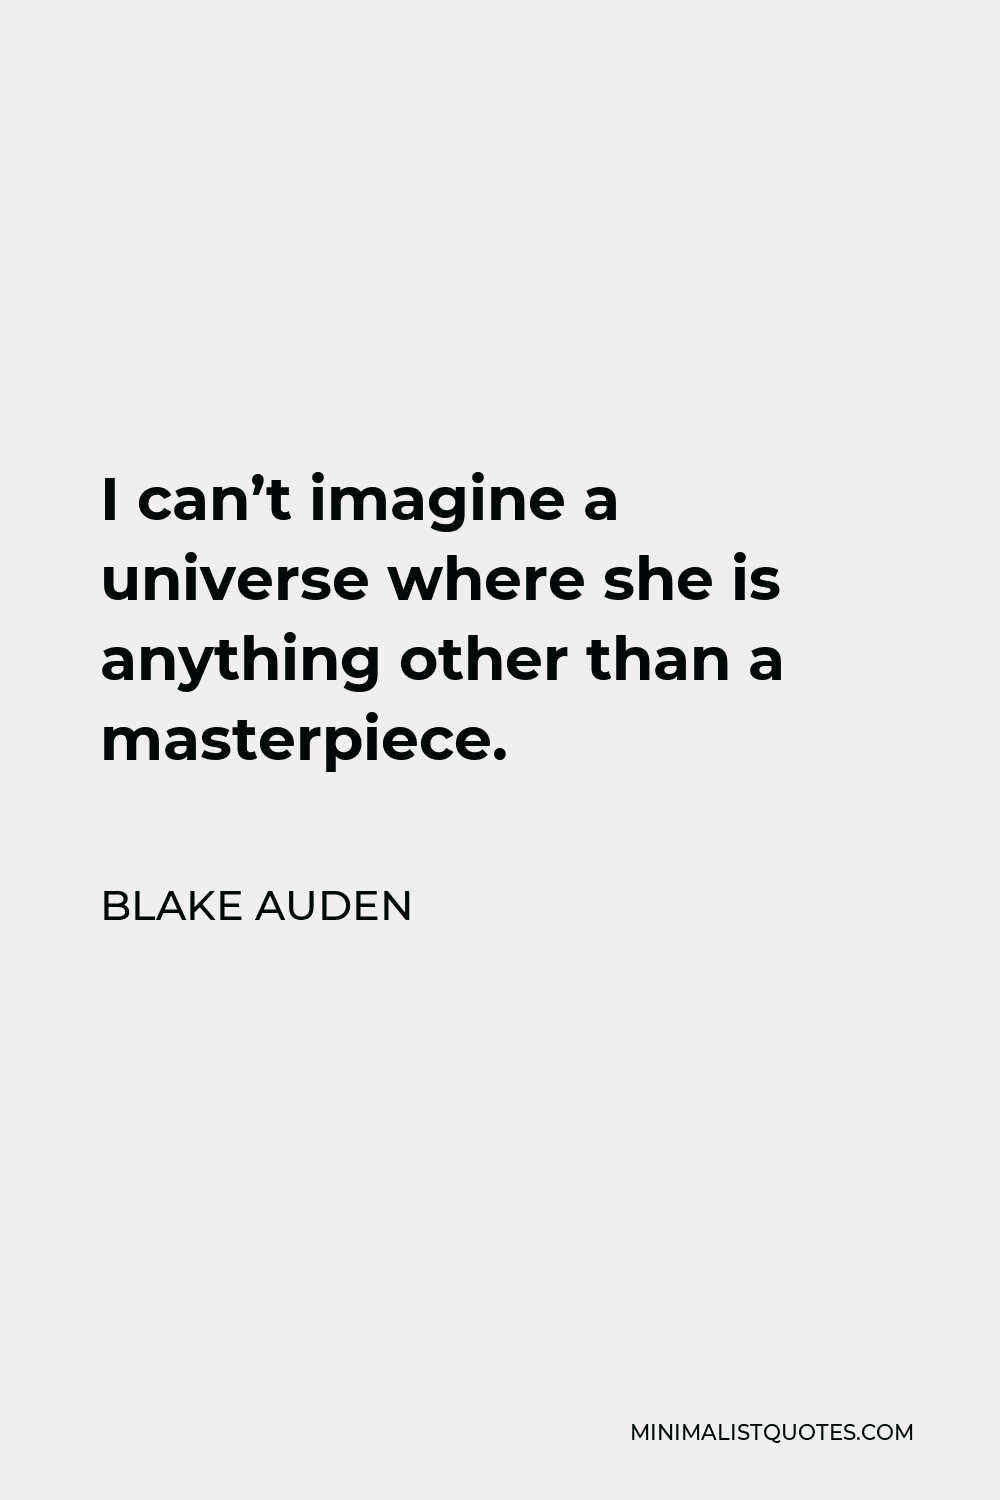 Blake Auden Quote - I can’t imagine a universe where she is anything other than a masterpiece.